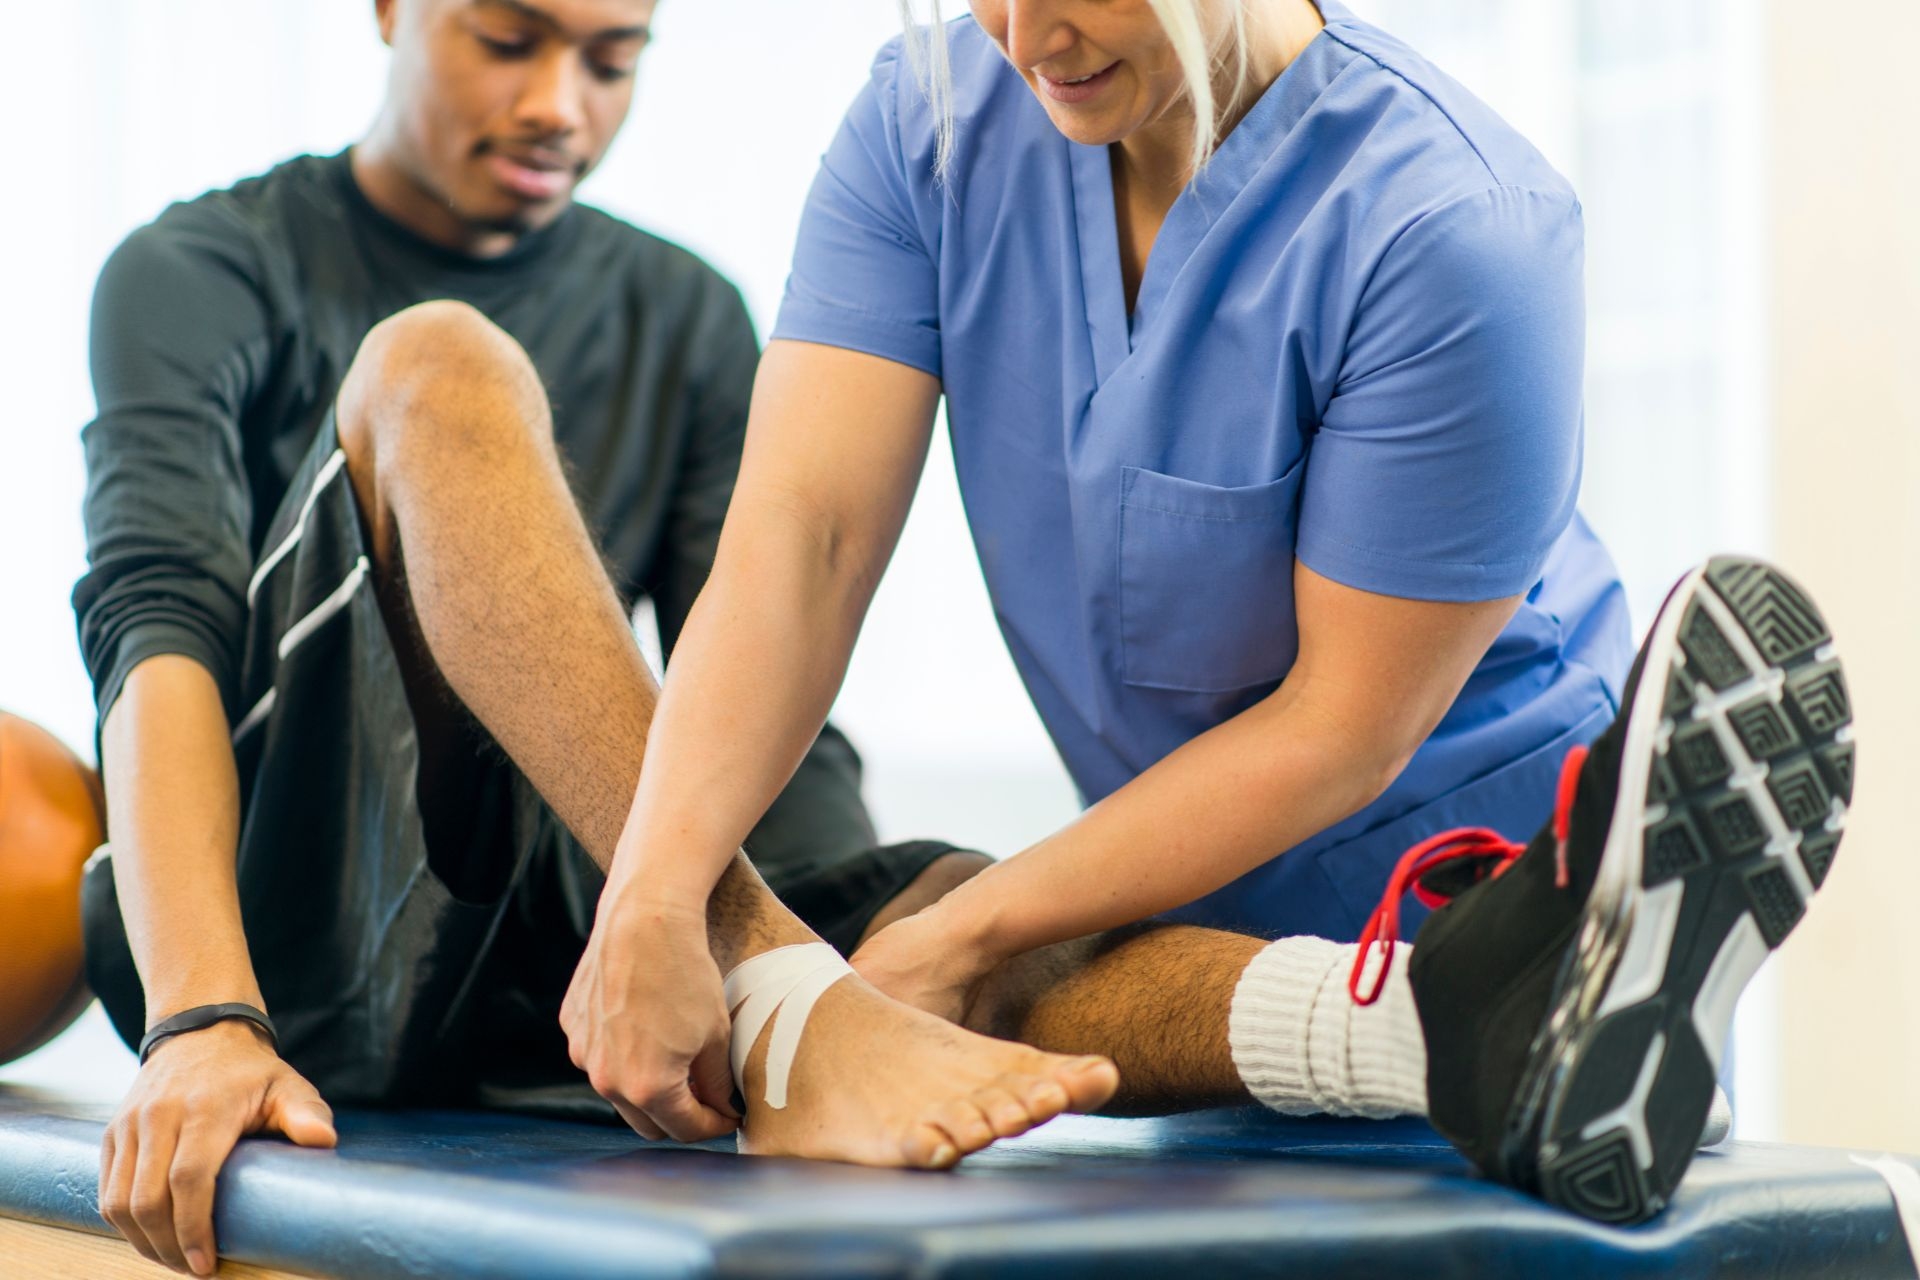 How long does it typically take to see results from instrument-assisted joint mobilization, and how many sessions are usually required for optimal outcomes?